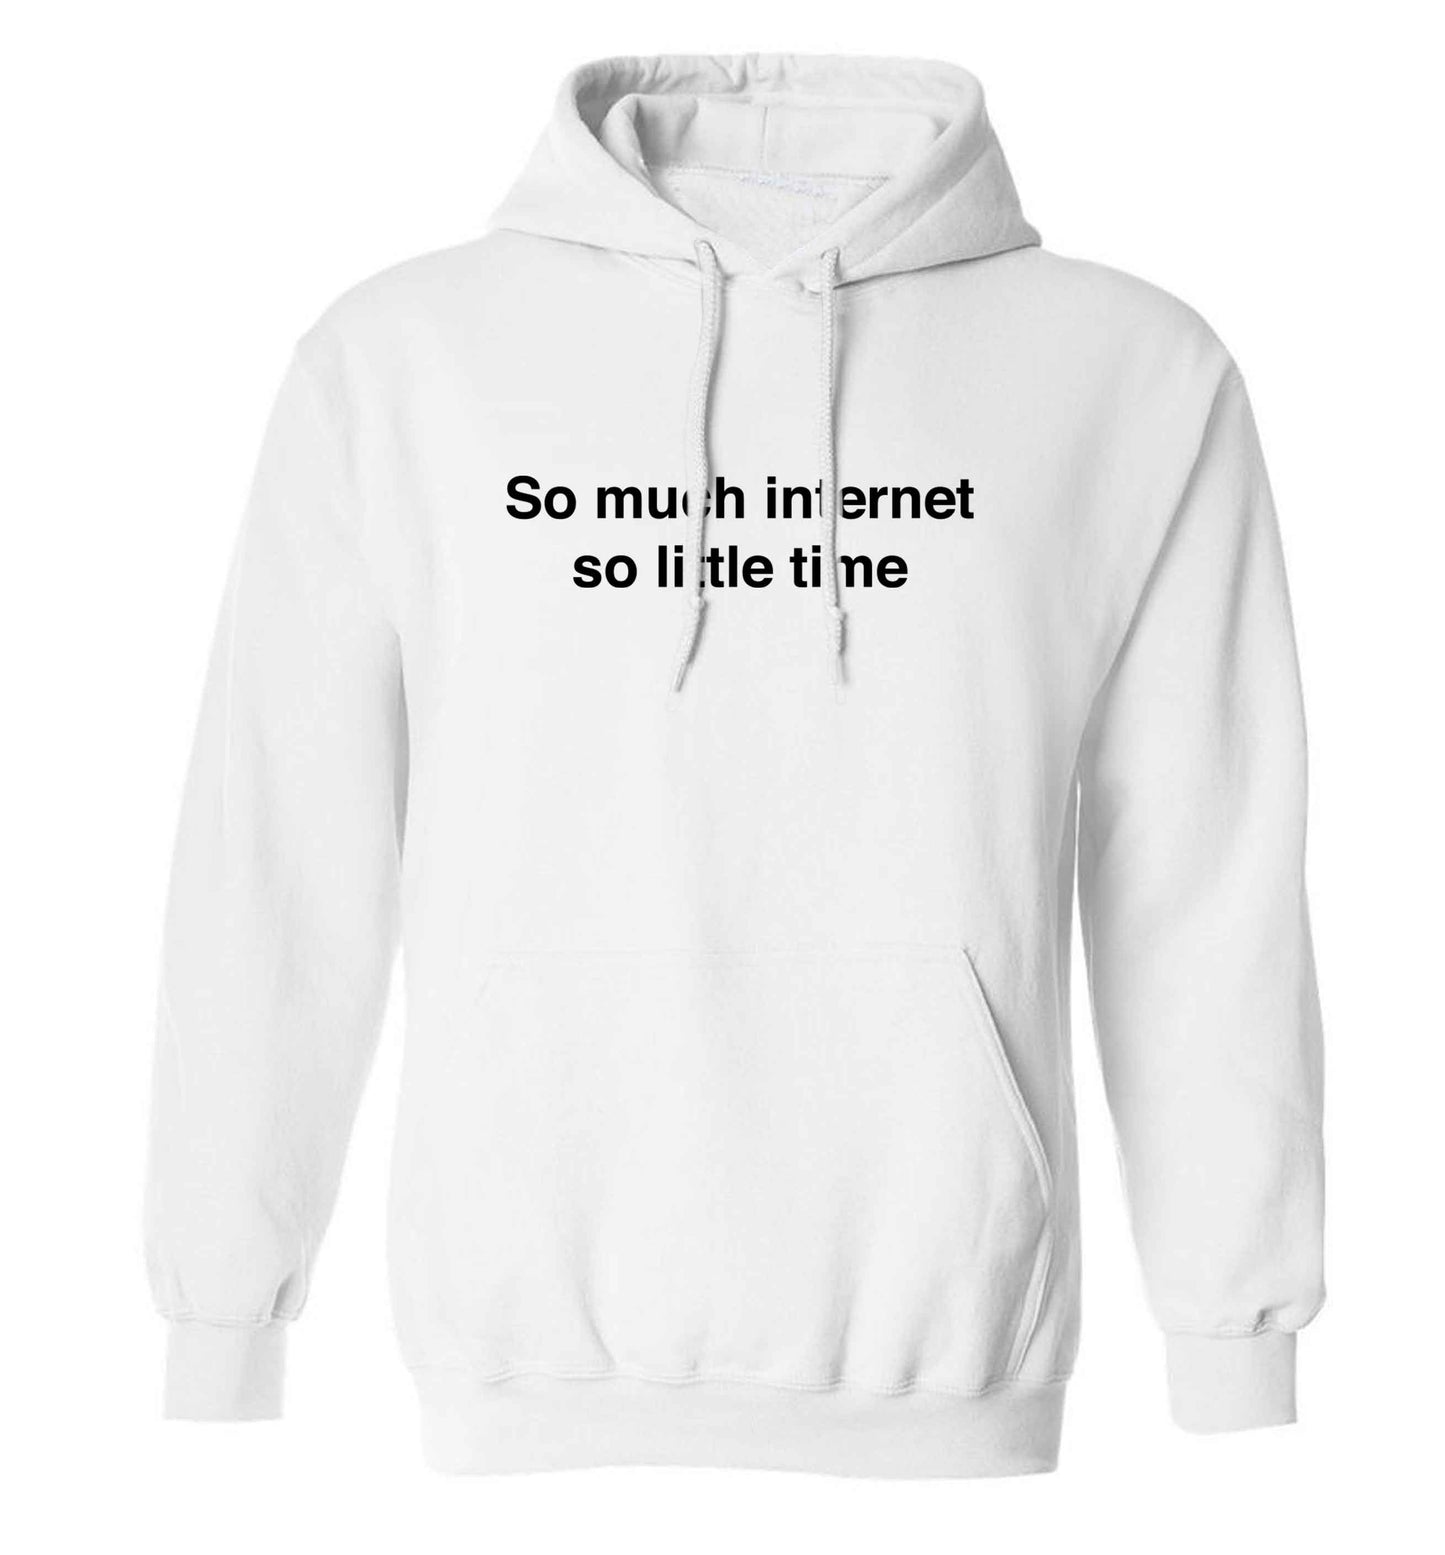 So much internet so little time adults unisex white hoodie 2XL